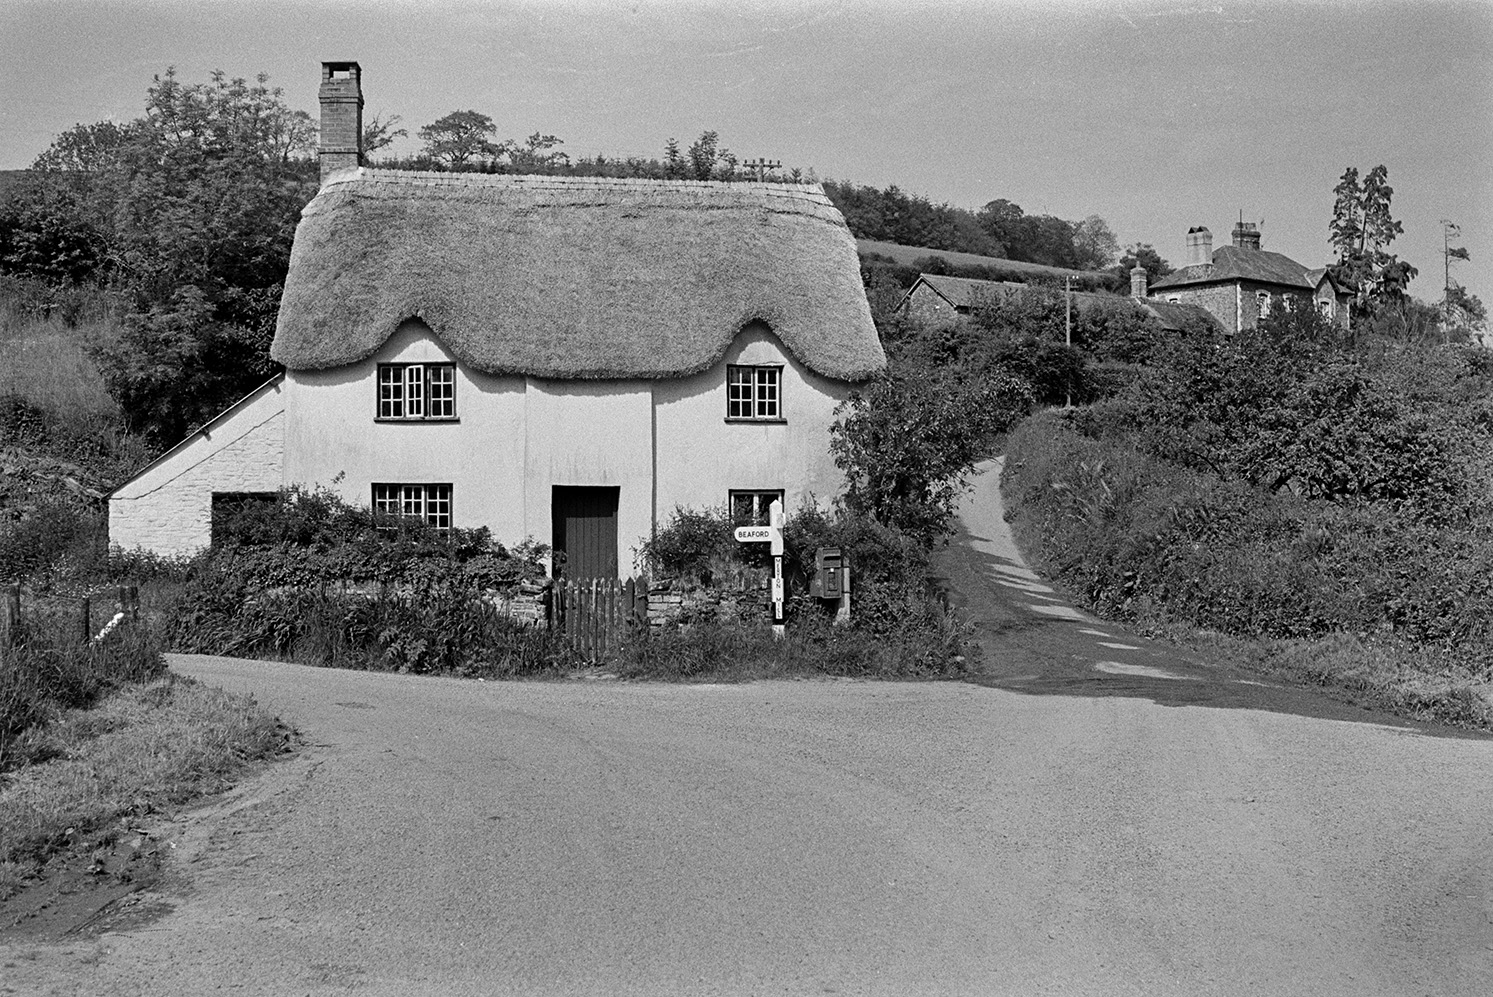 A thatched cottage, with eyebrow eaves, at a road junction at Merton Mill near Merton. A signpost and post box are visible by the wall outside the cottage.